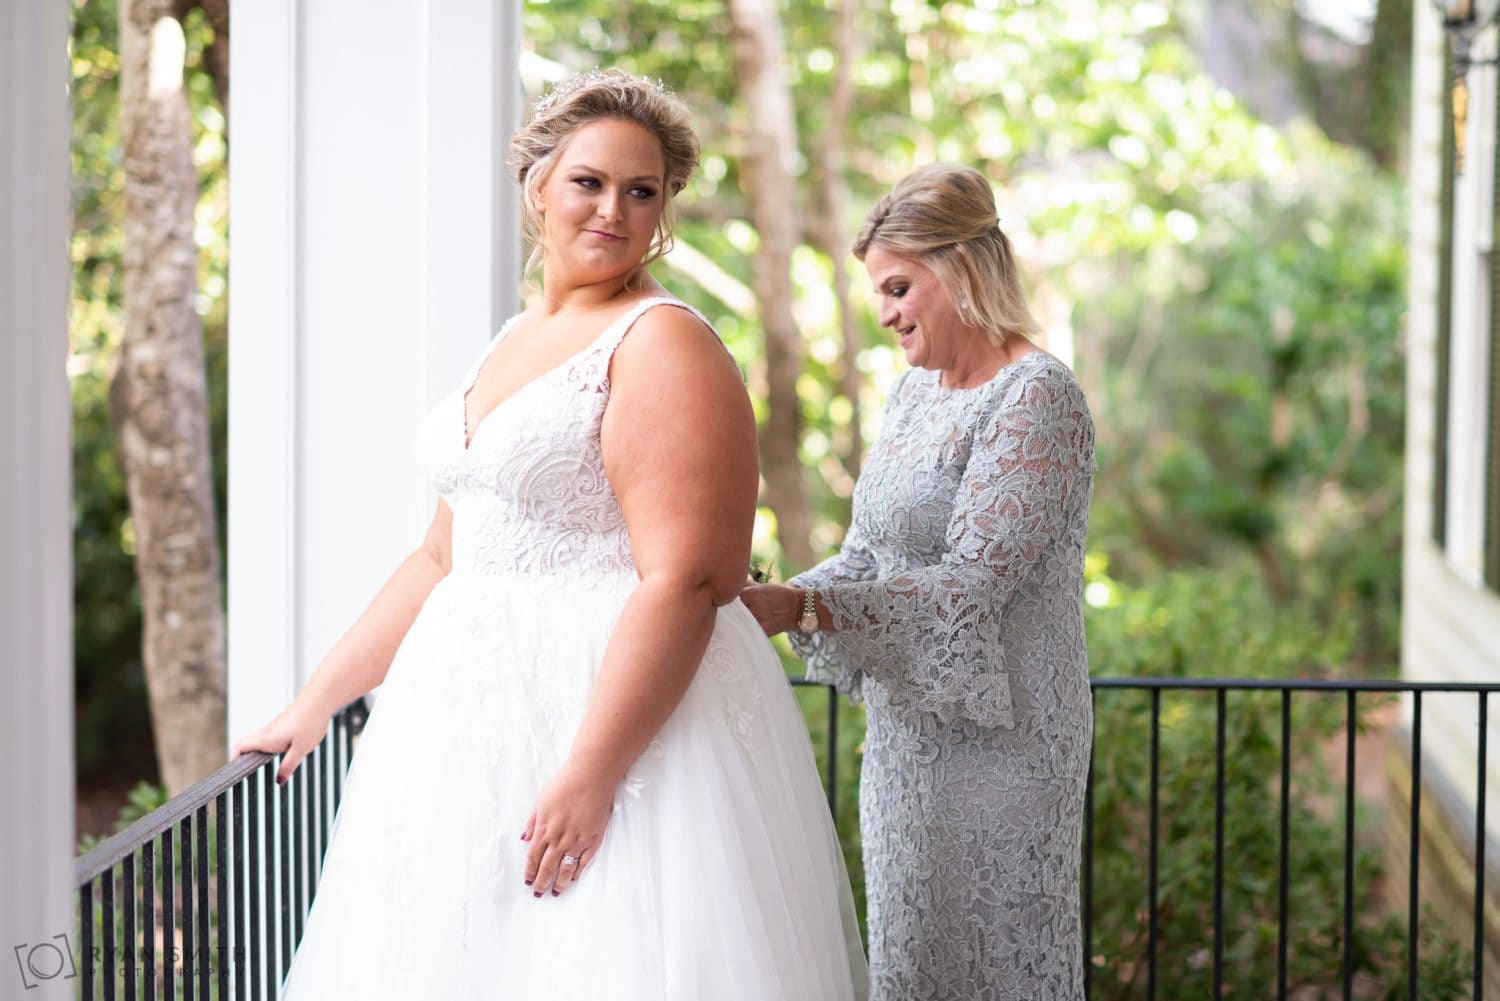 Mom helping bride with her dress